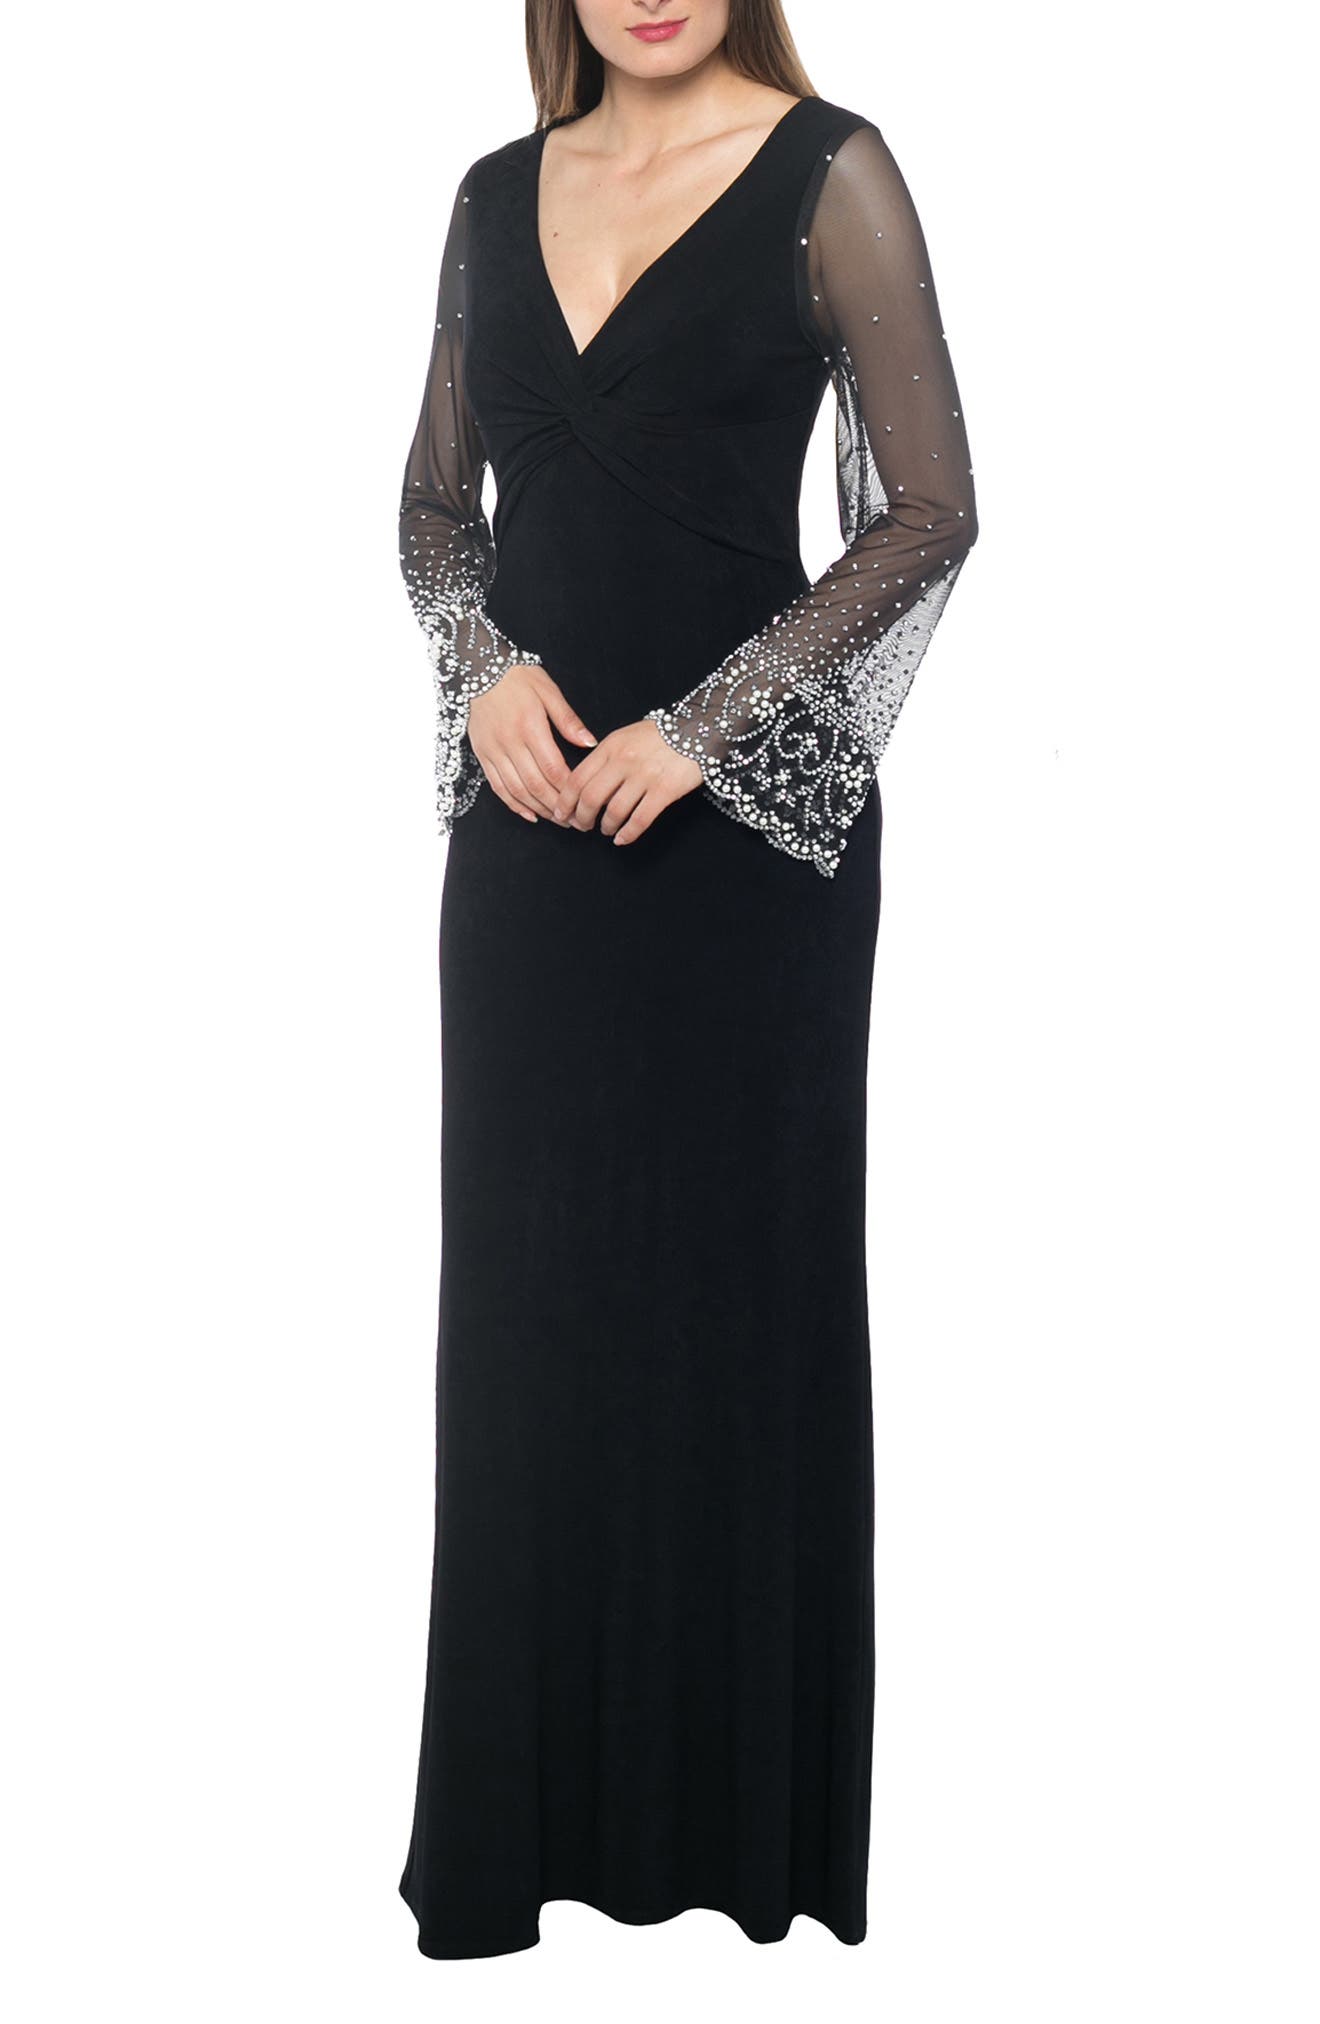 1920s Party Dresses, Great Gatsby Gowns, Prom Dresses Marina Beaded Sheer Sleeve Gown in Black at Nordstrom Rack Size 14 $96.97 AT vintagedancer.com